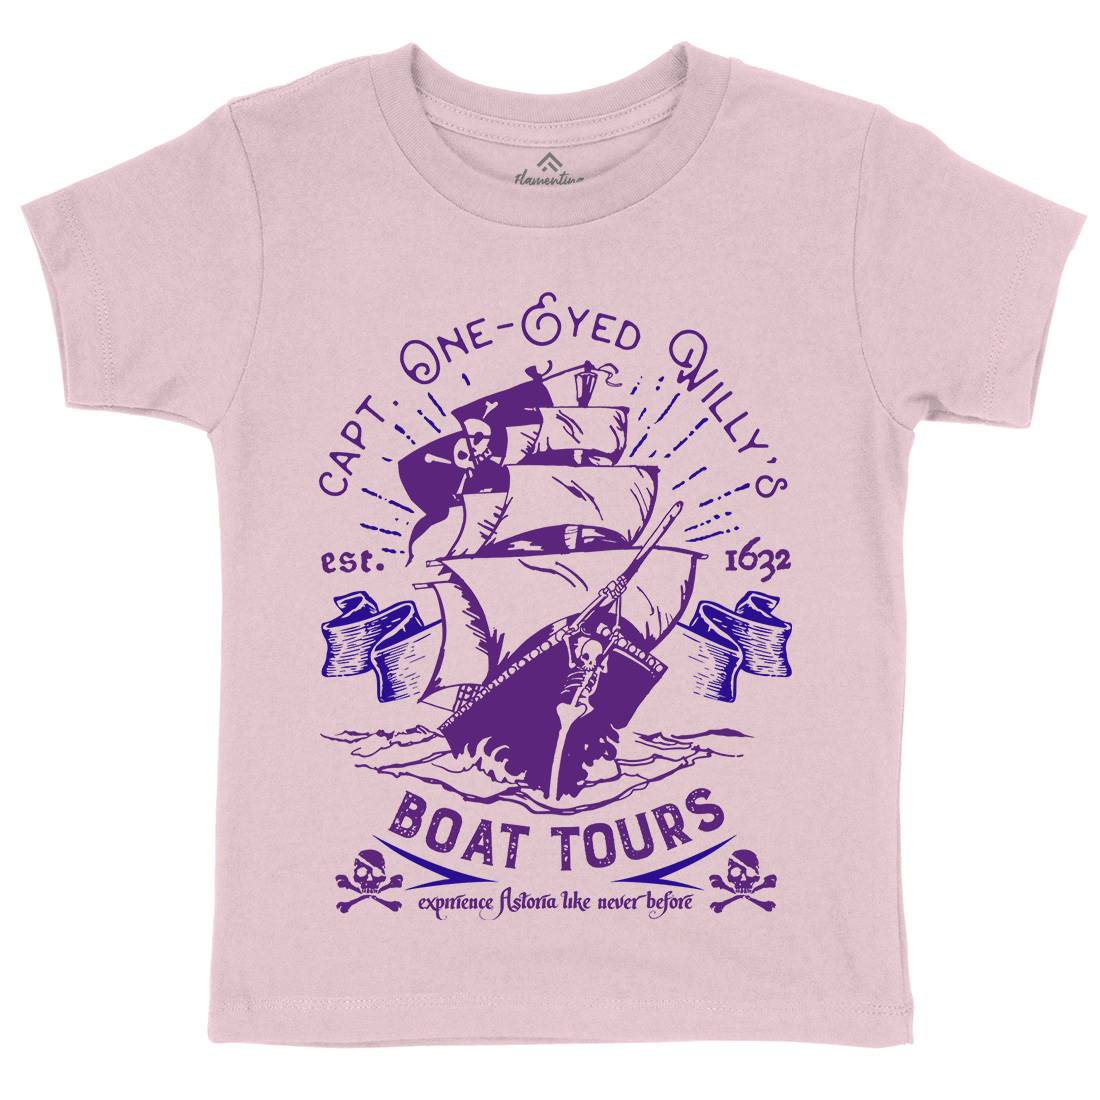 One-Eyed Willys Boat Tours Kids Organic Crew Neck T-Shirt Horror D160